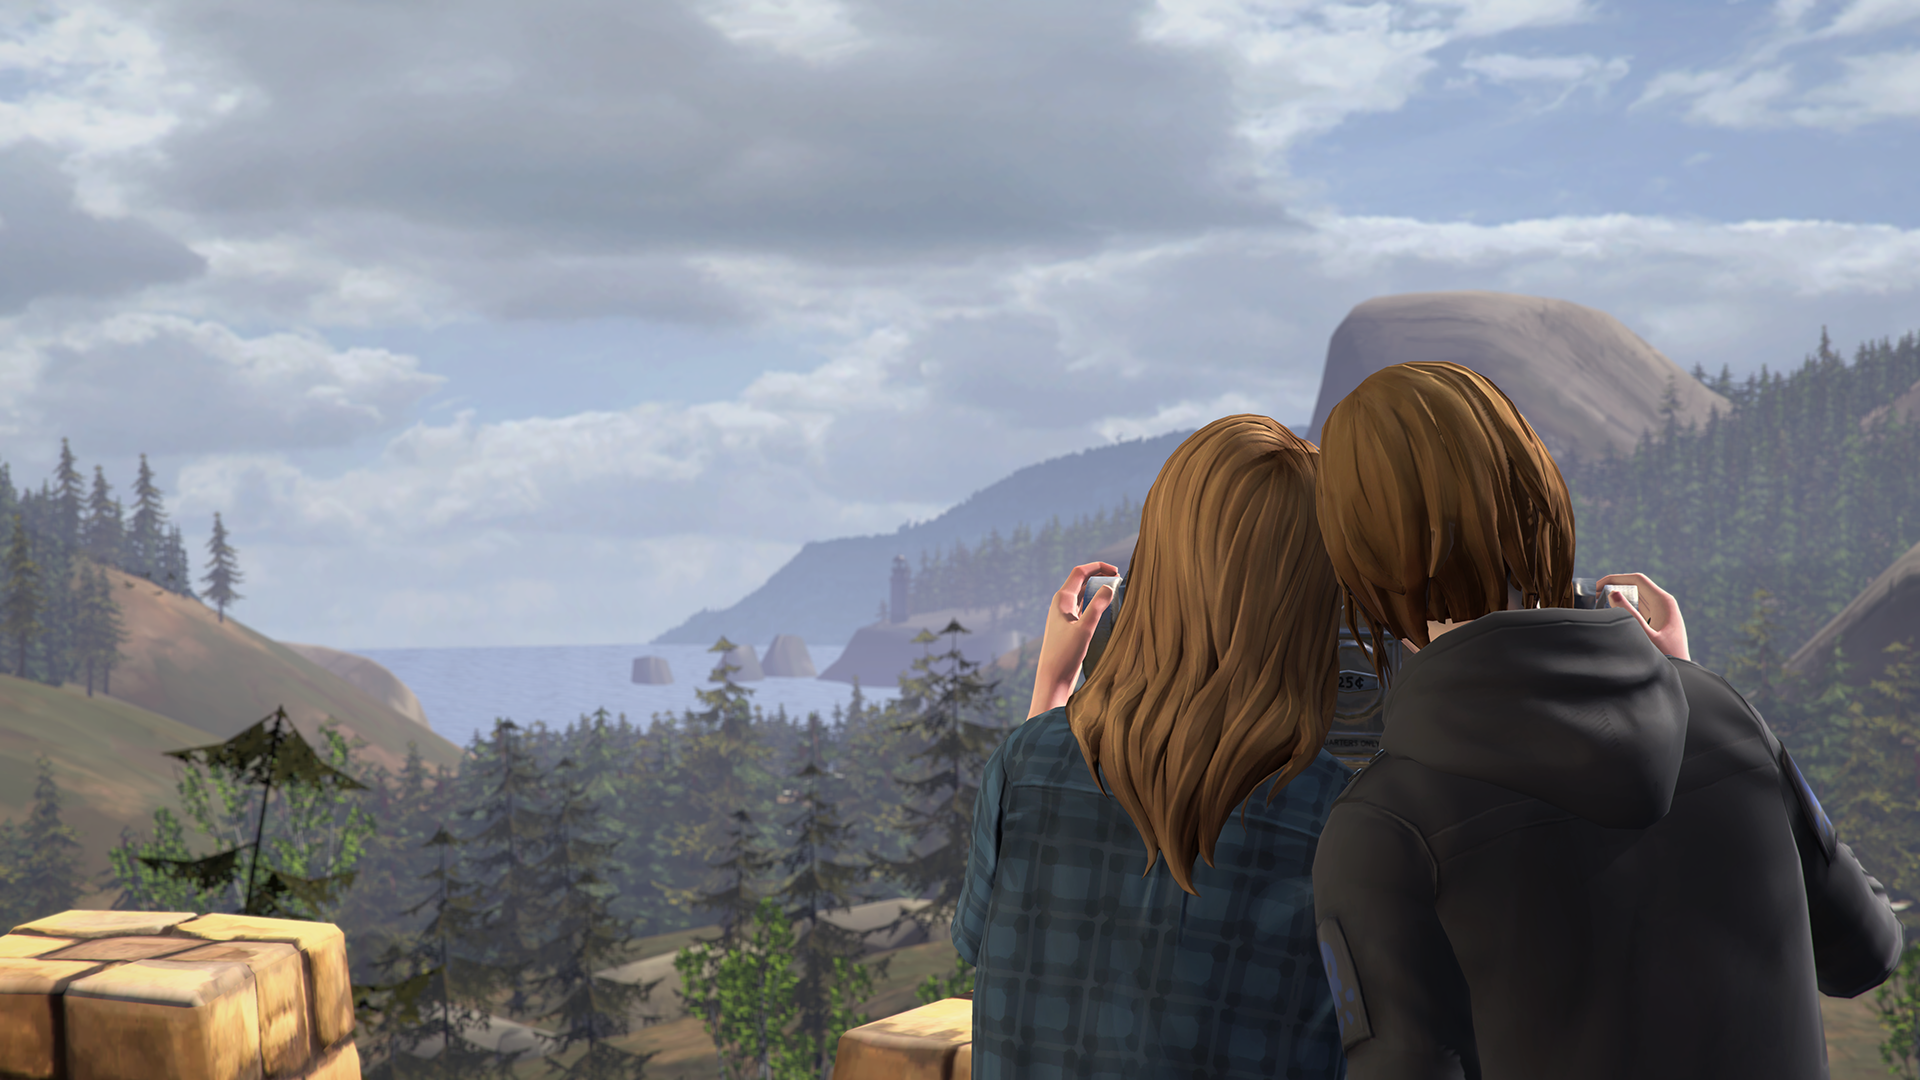 Image for Here's twenty minutes of dubious choices and bonding in Life is Strange: Before the Storm